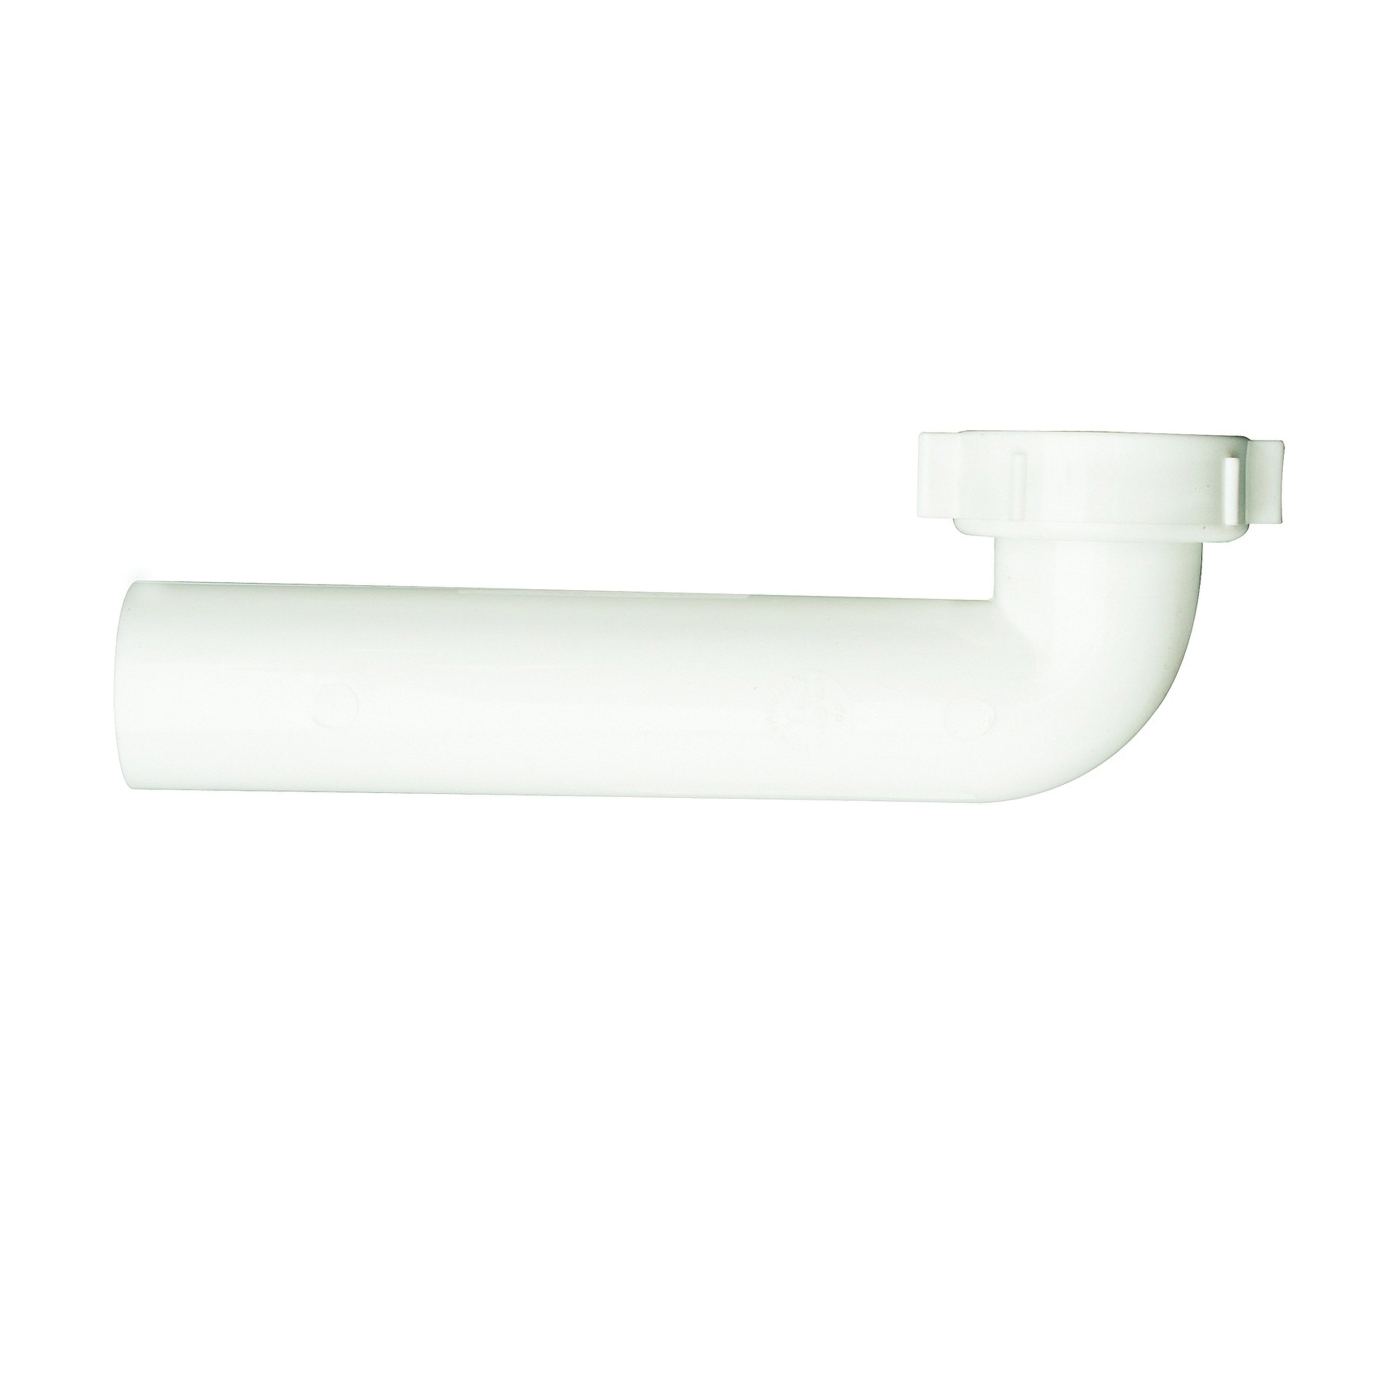 PP101AW Waste Arm, 1-1/2 in, Direct-Connect, Plastic, White